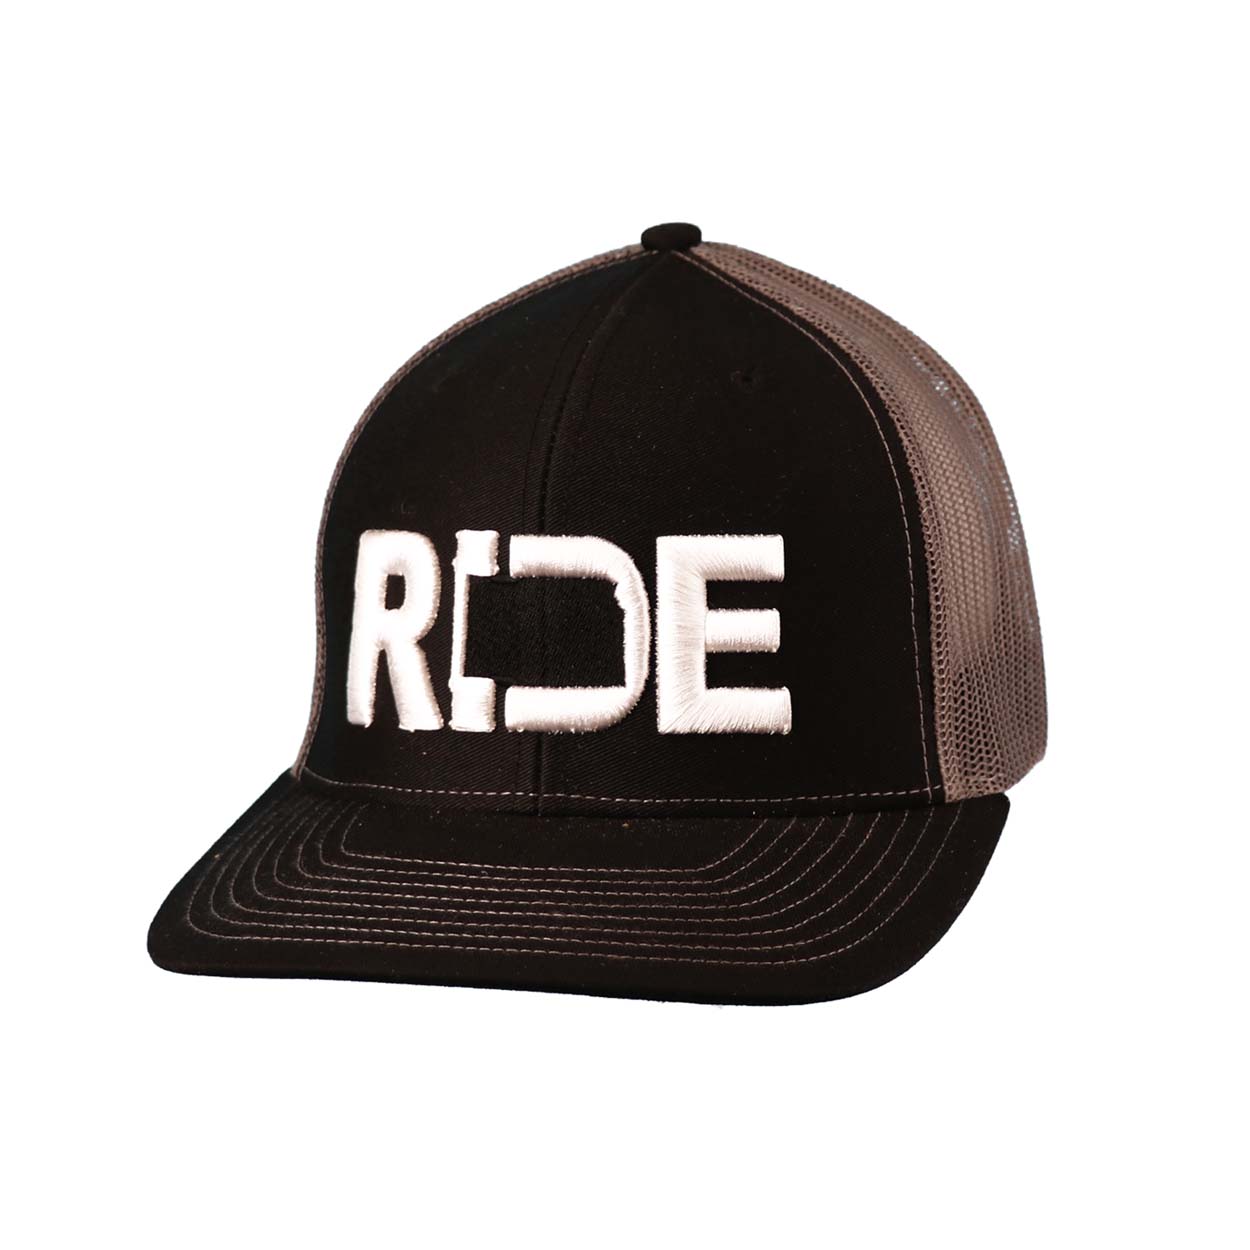 Ride Kansas Classic Embroidered Snapback Trucker Hat Black/Charcoal